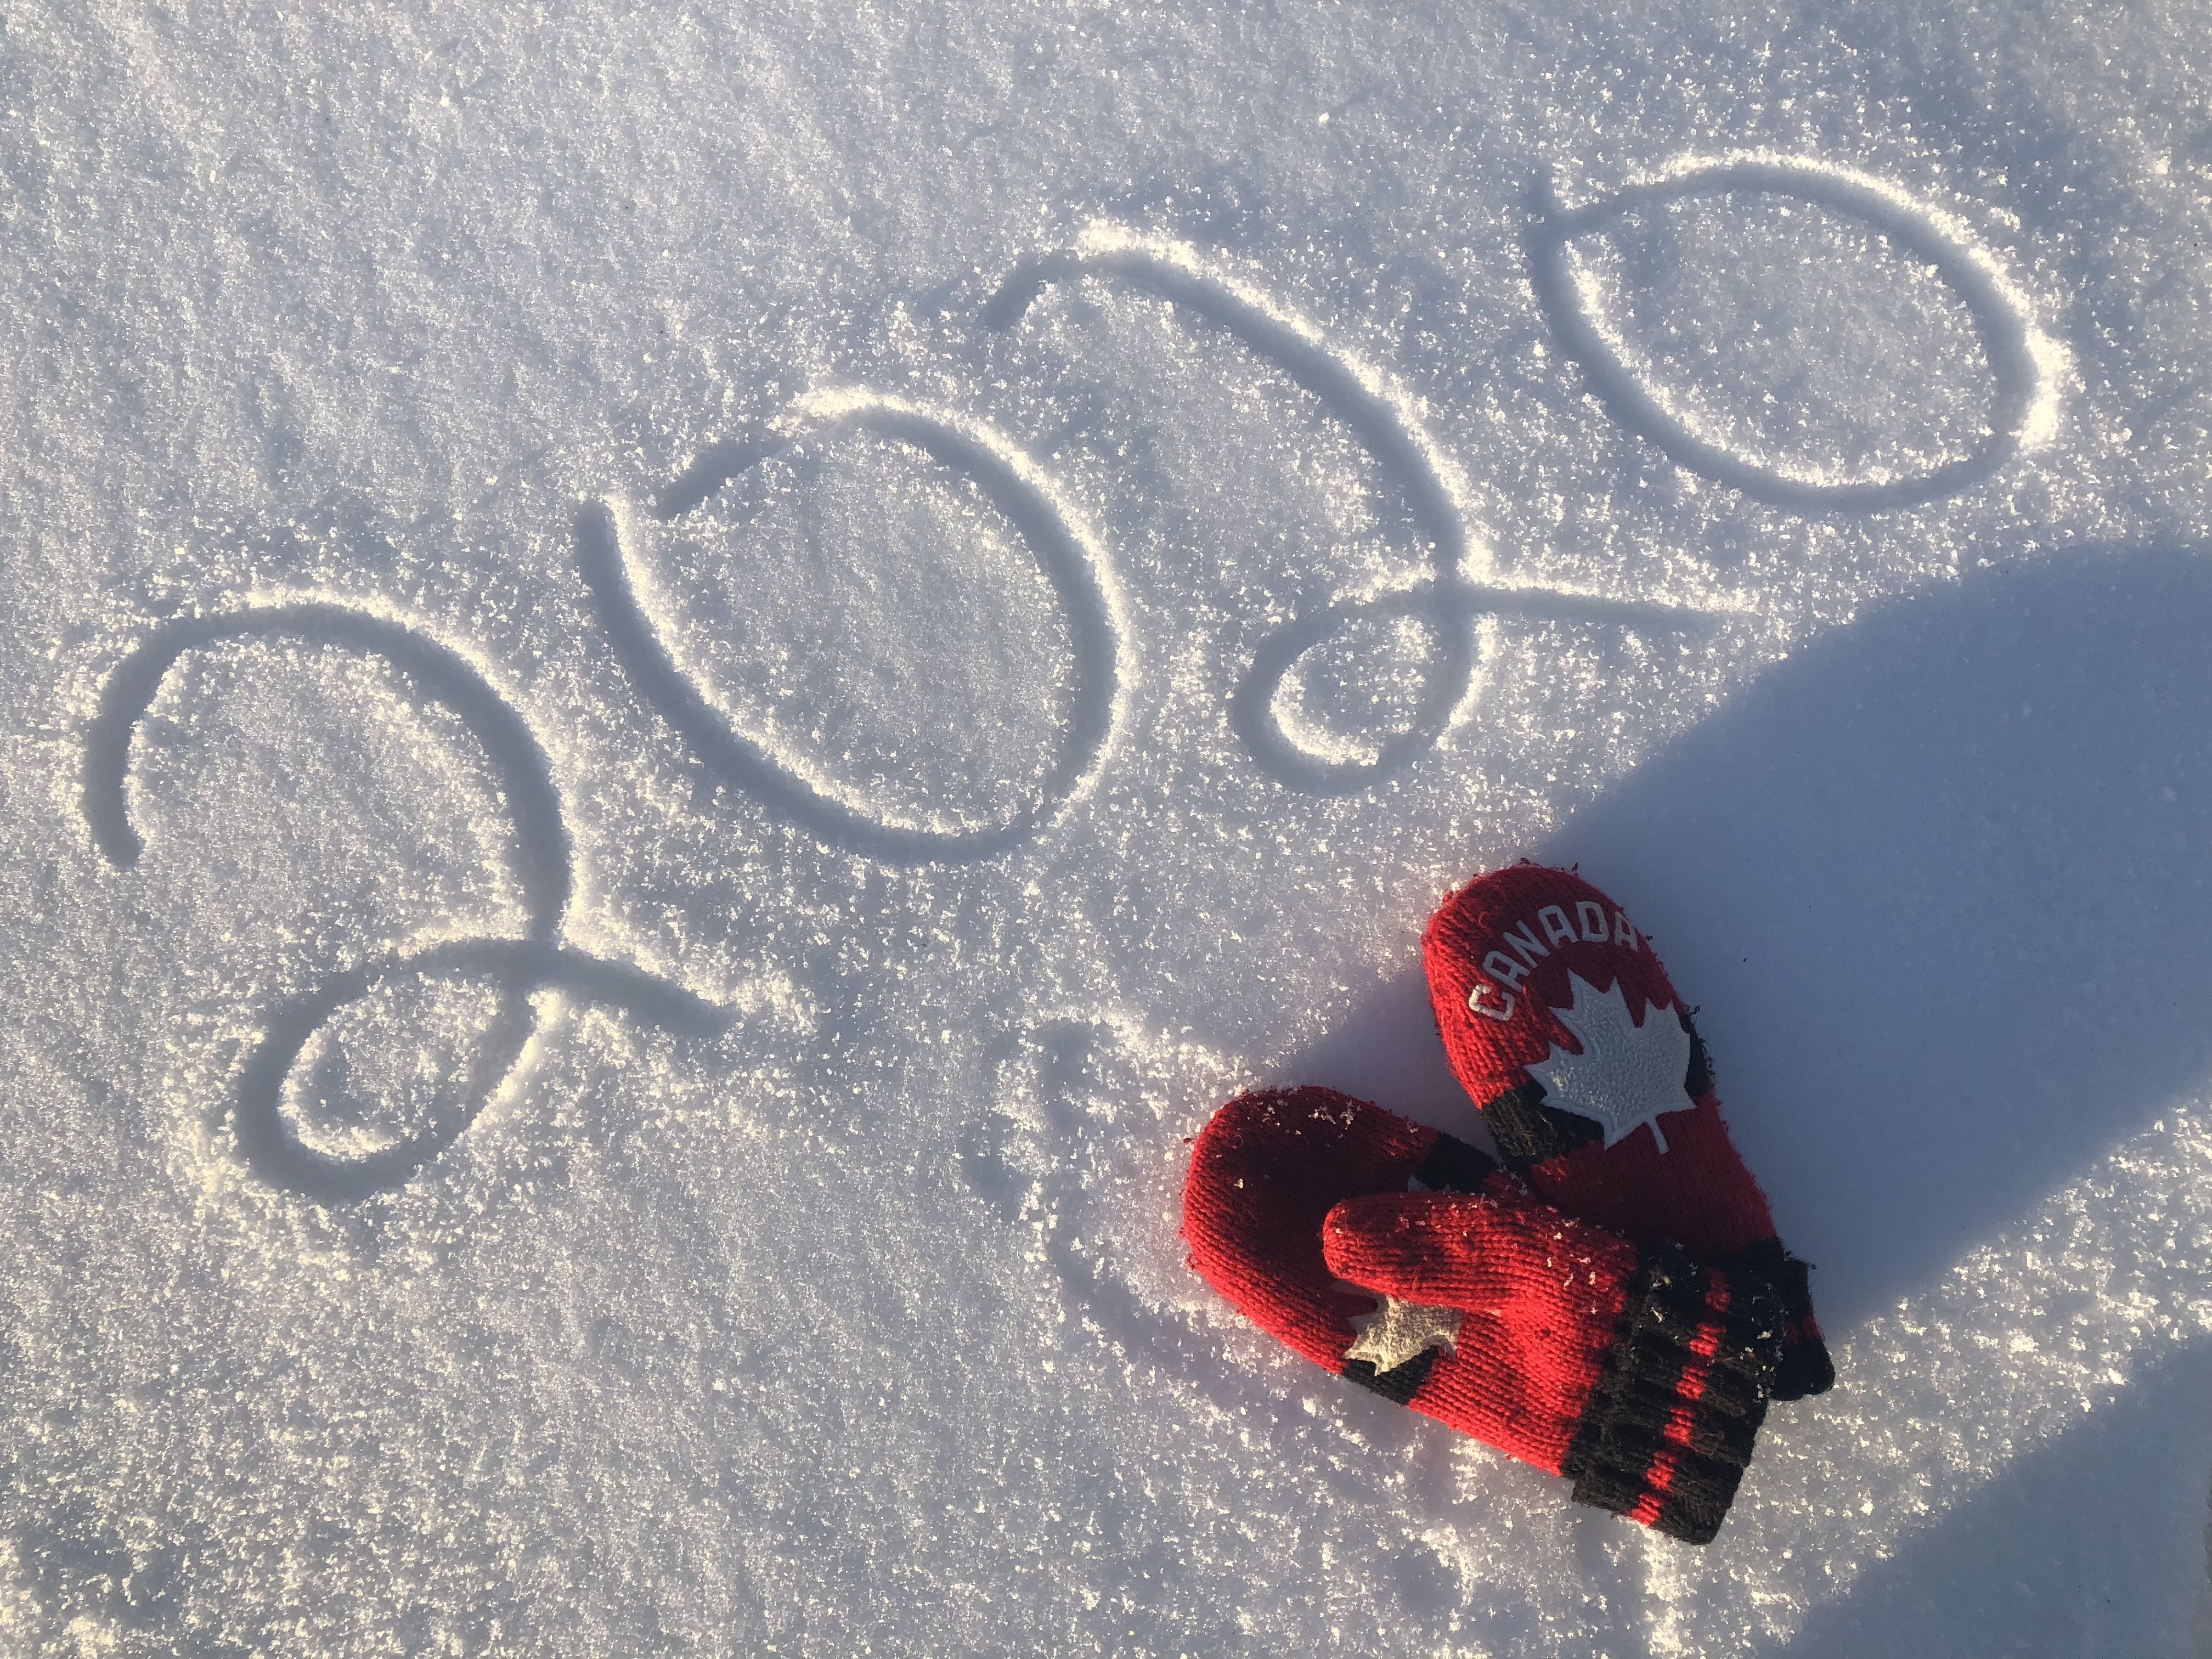 The year 2020 written in snow. Nearby sits a red pair of Canada mittens.